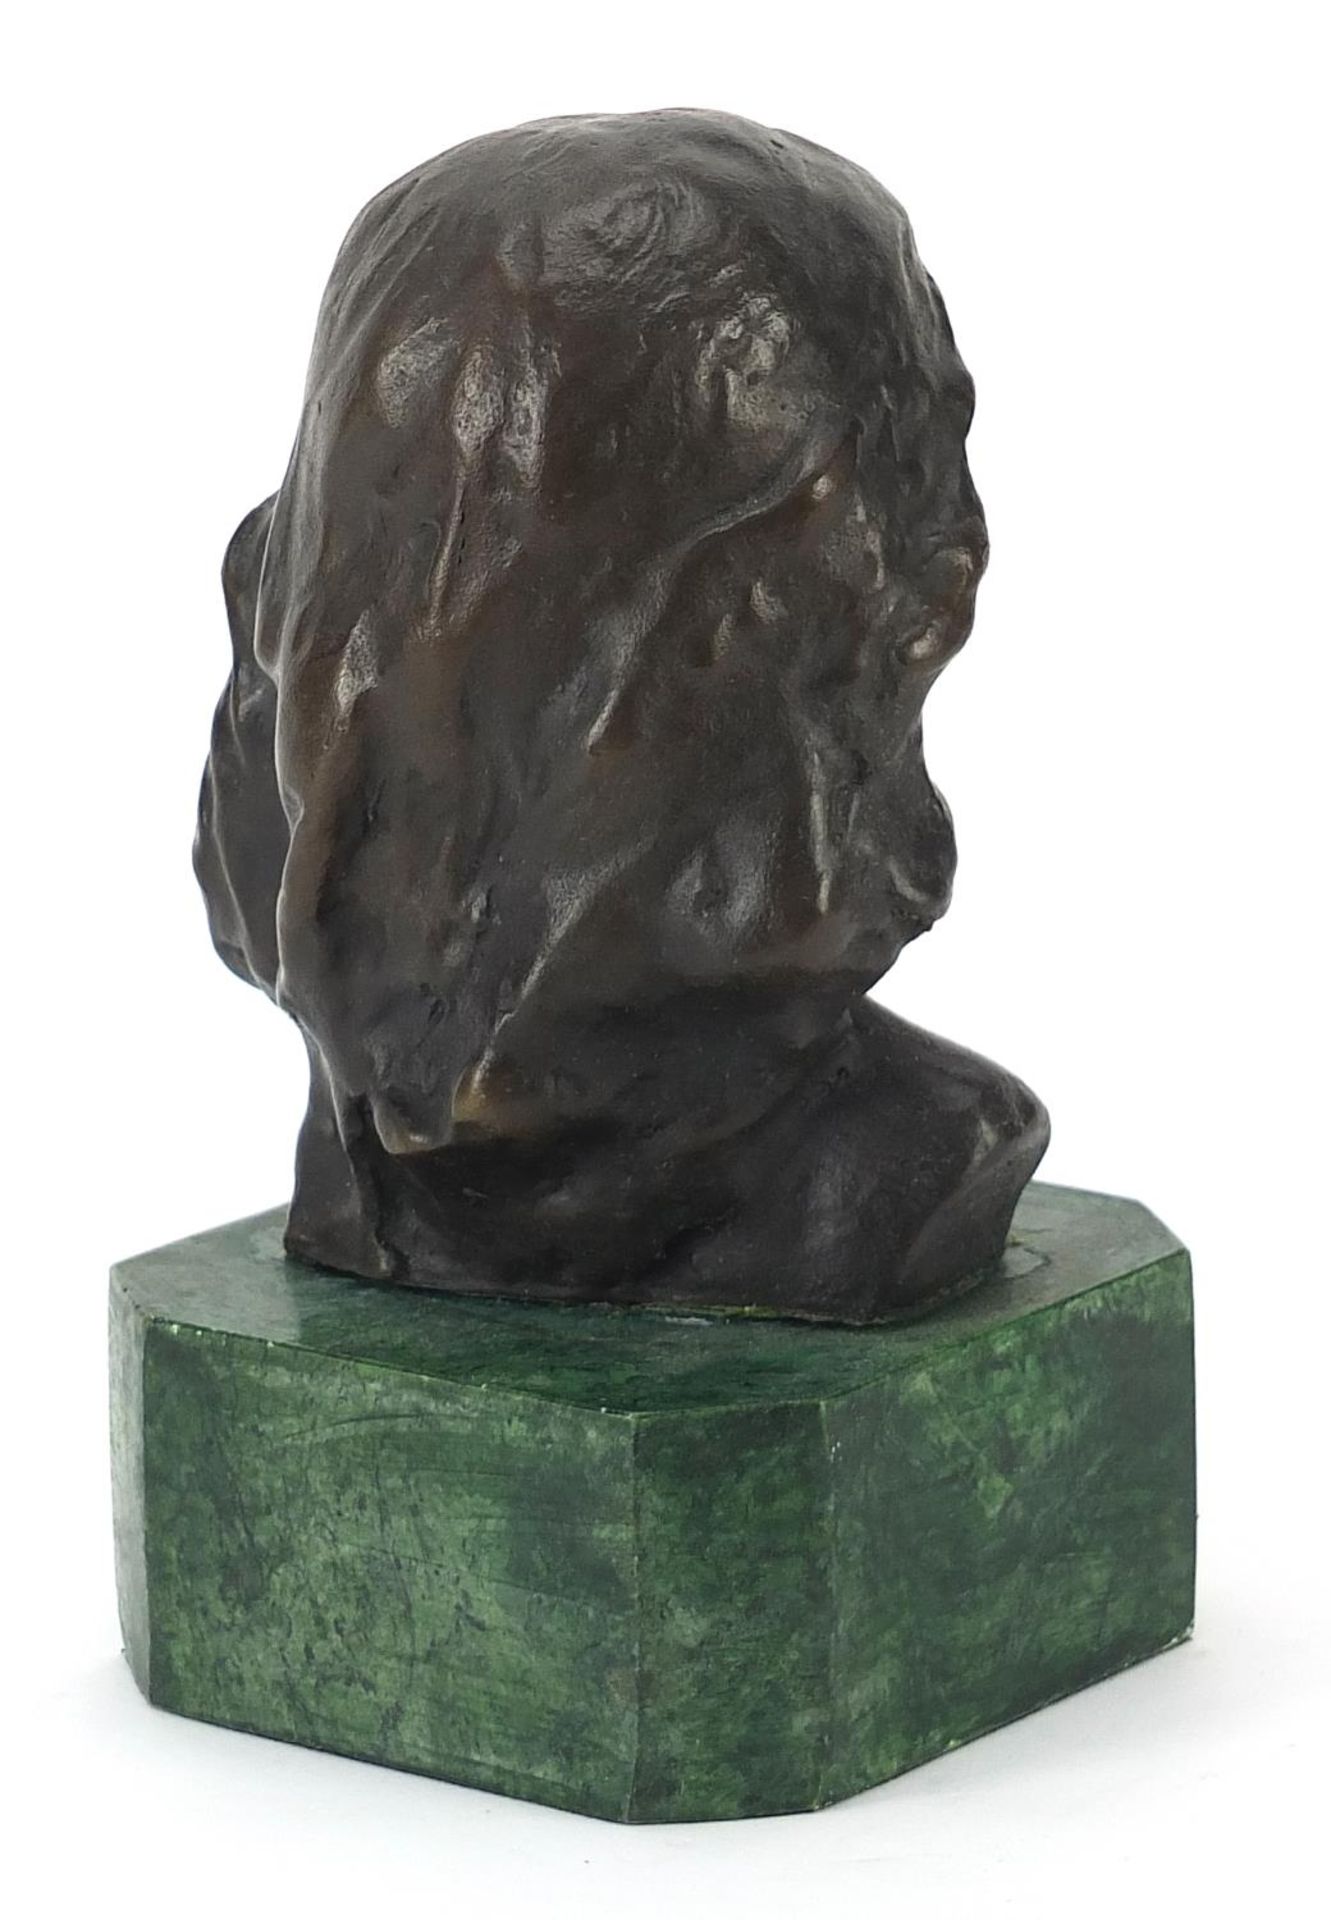 Patinated bronze head and shoulders bust of a young female raised on a green marbleised base, 15cm - Image 3 of 4